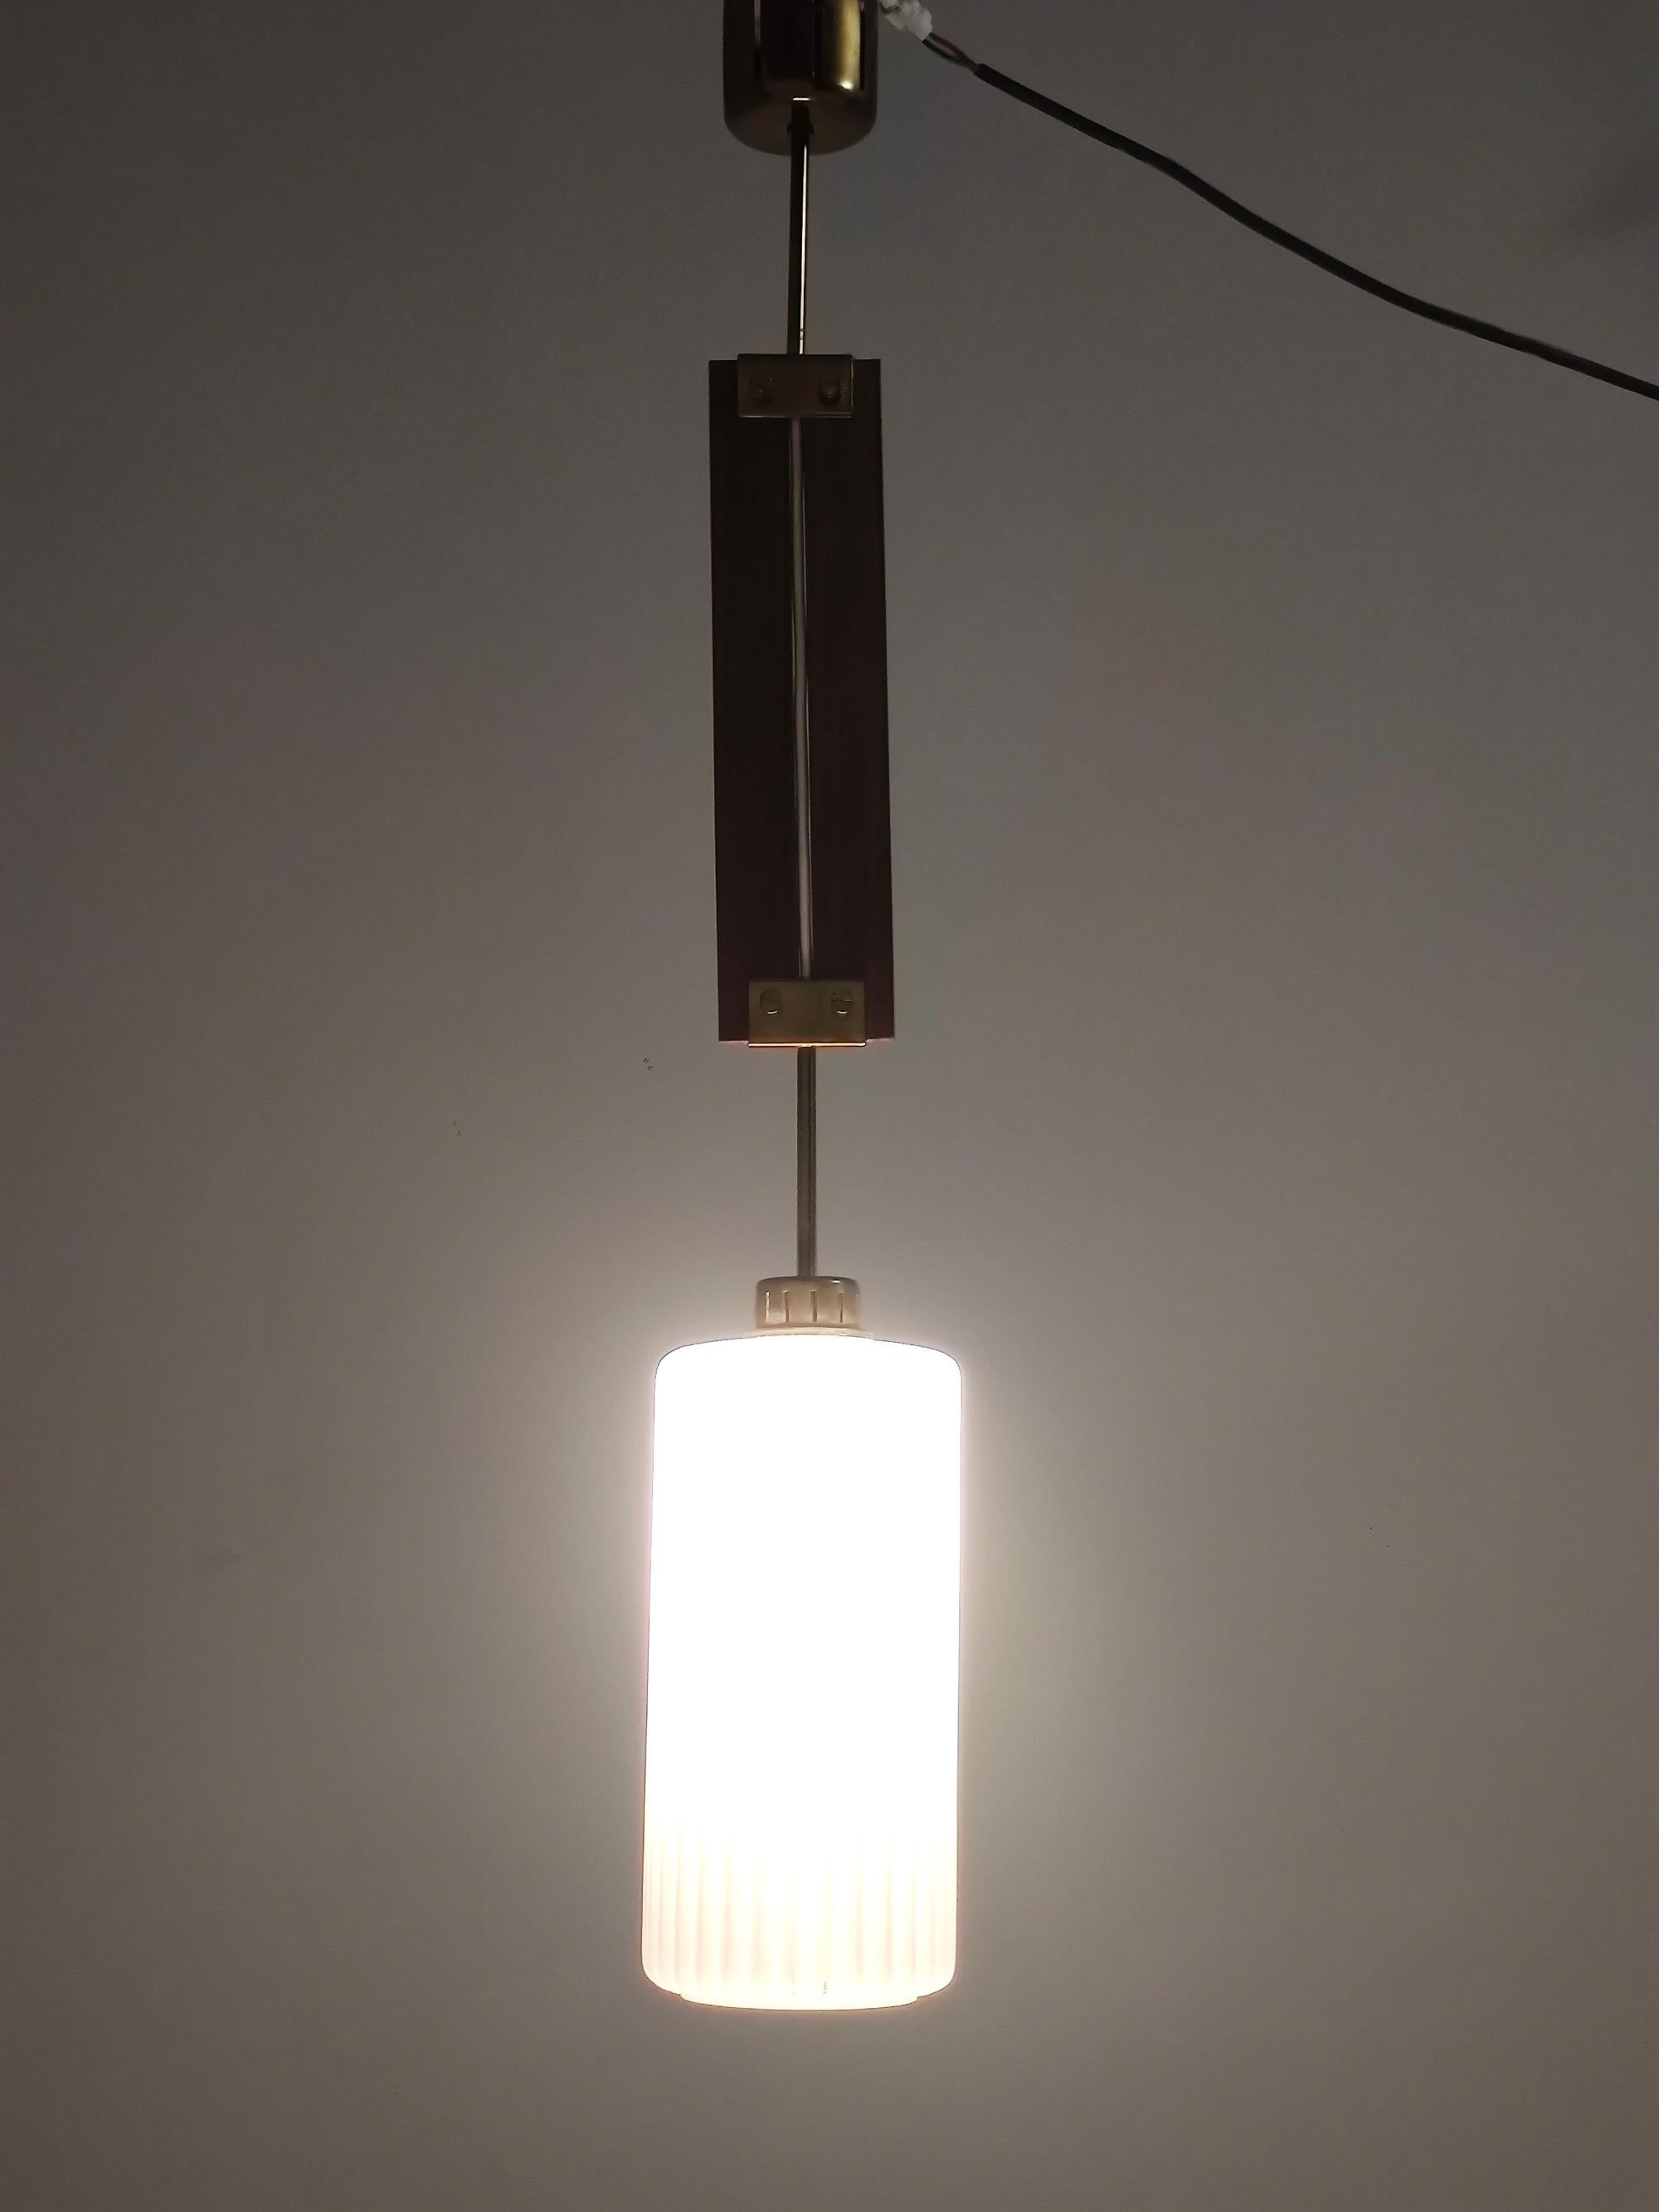 Made in Italy, 1960s.
This pendant is made in glazed opaline glass, teak and brass.
It is a vintage item, therefore it might show slight traces of use, but it can be considered as in excellent original condition and ready to give a beautiful